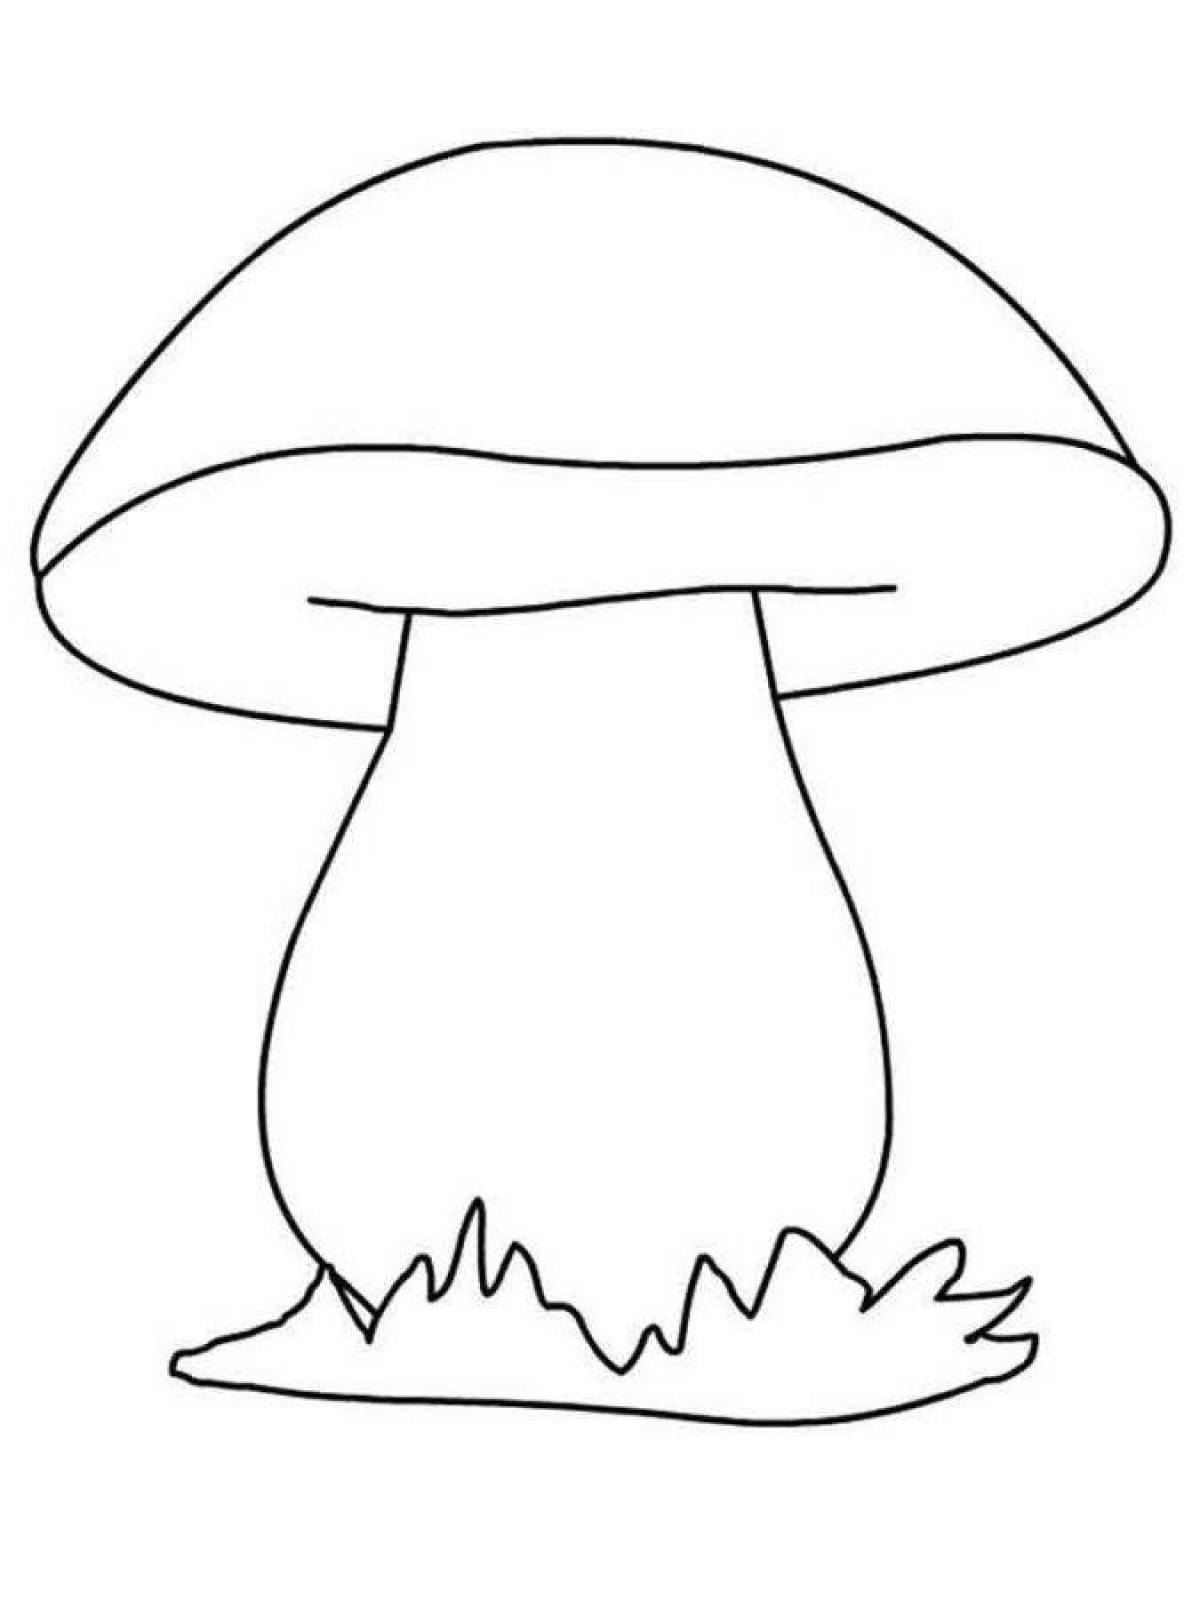 Colorful mushroom coloring page